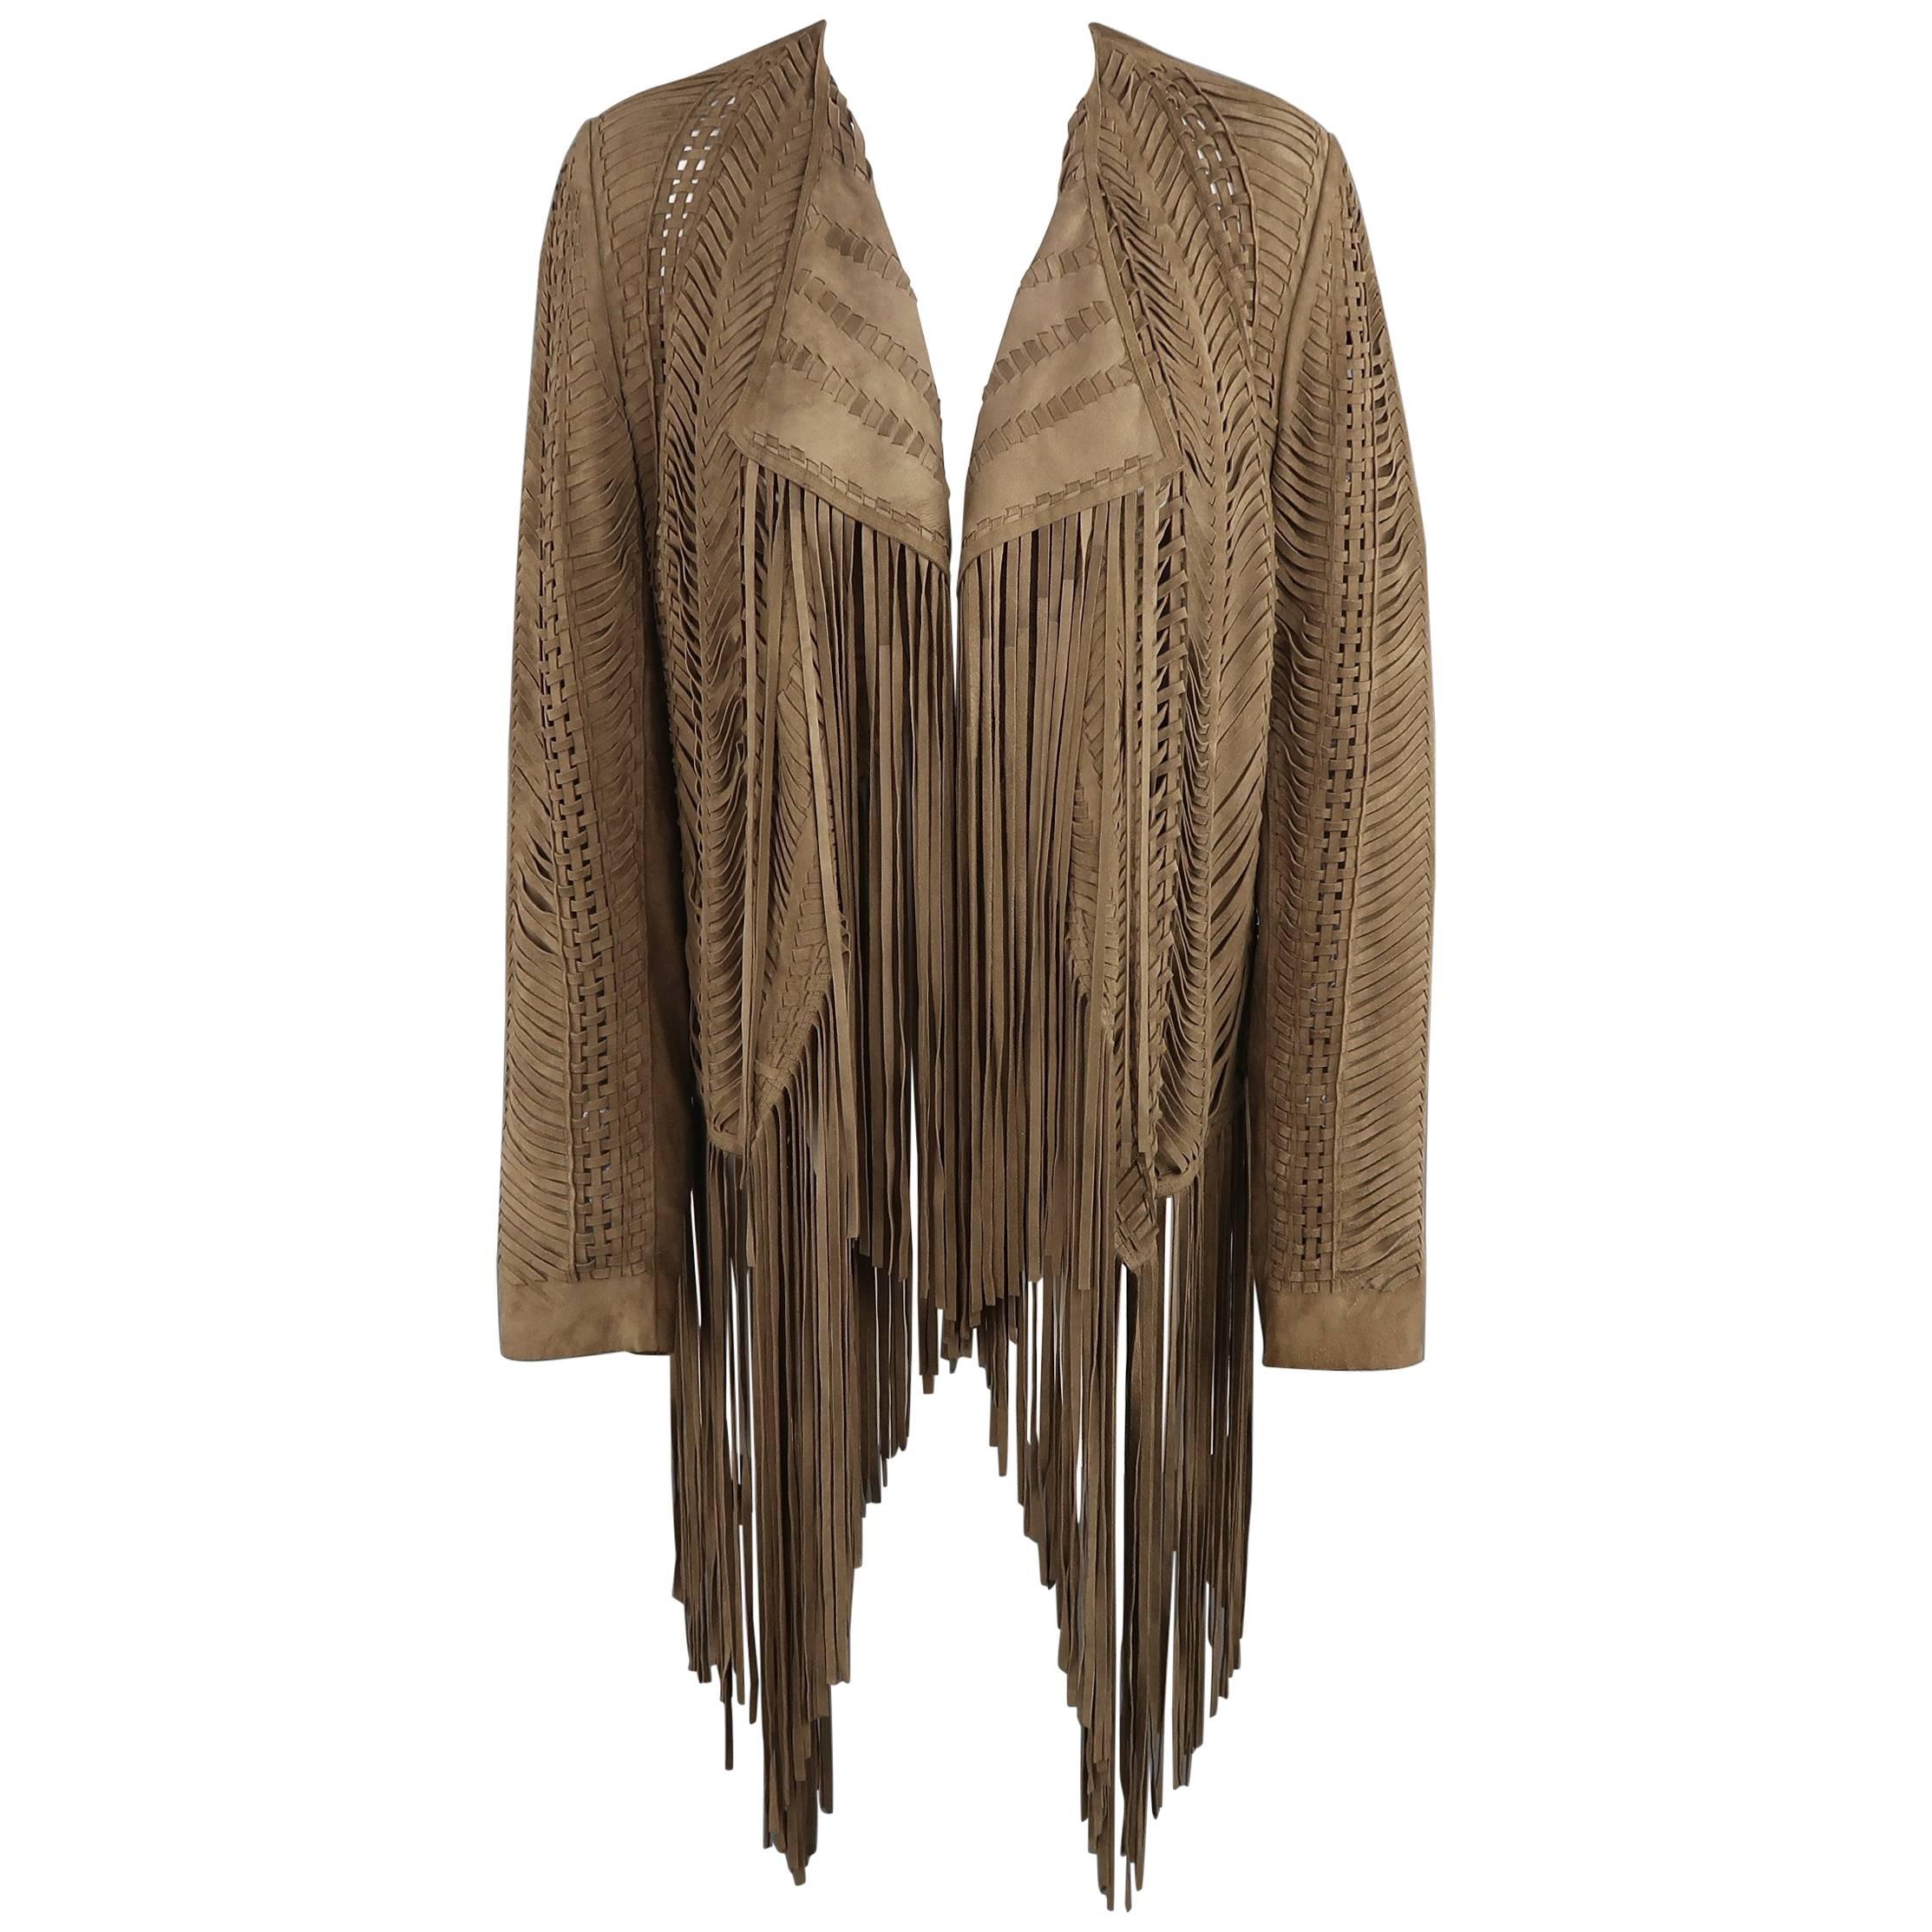 RALPH LAUREN COLLECTION Size 6 Olive Taupe Woven Fringe Jacket - Retail $4500